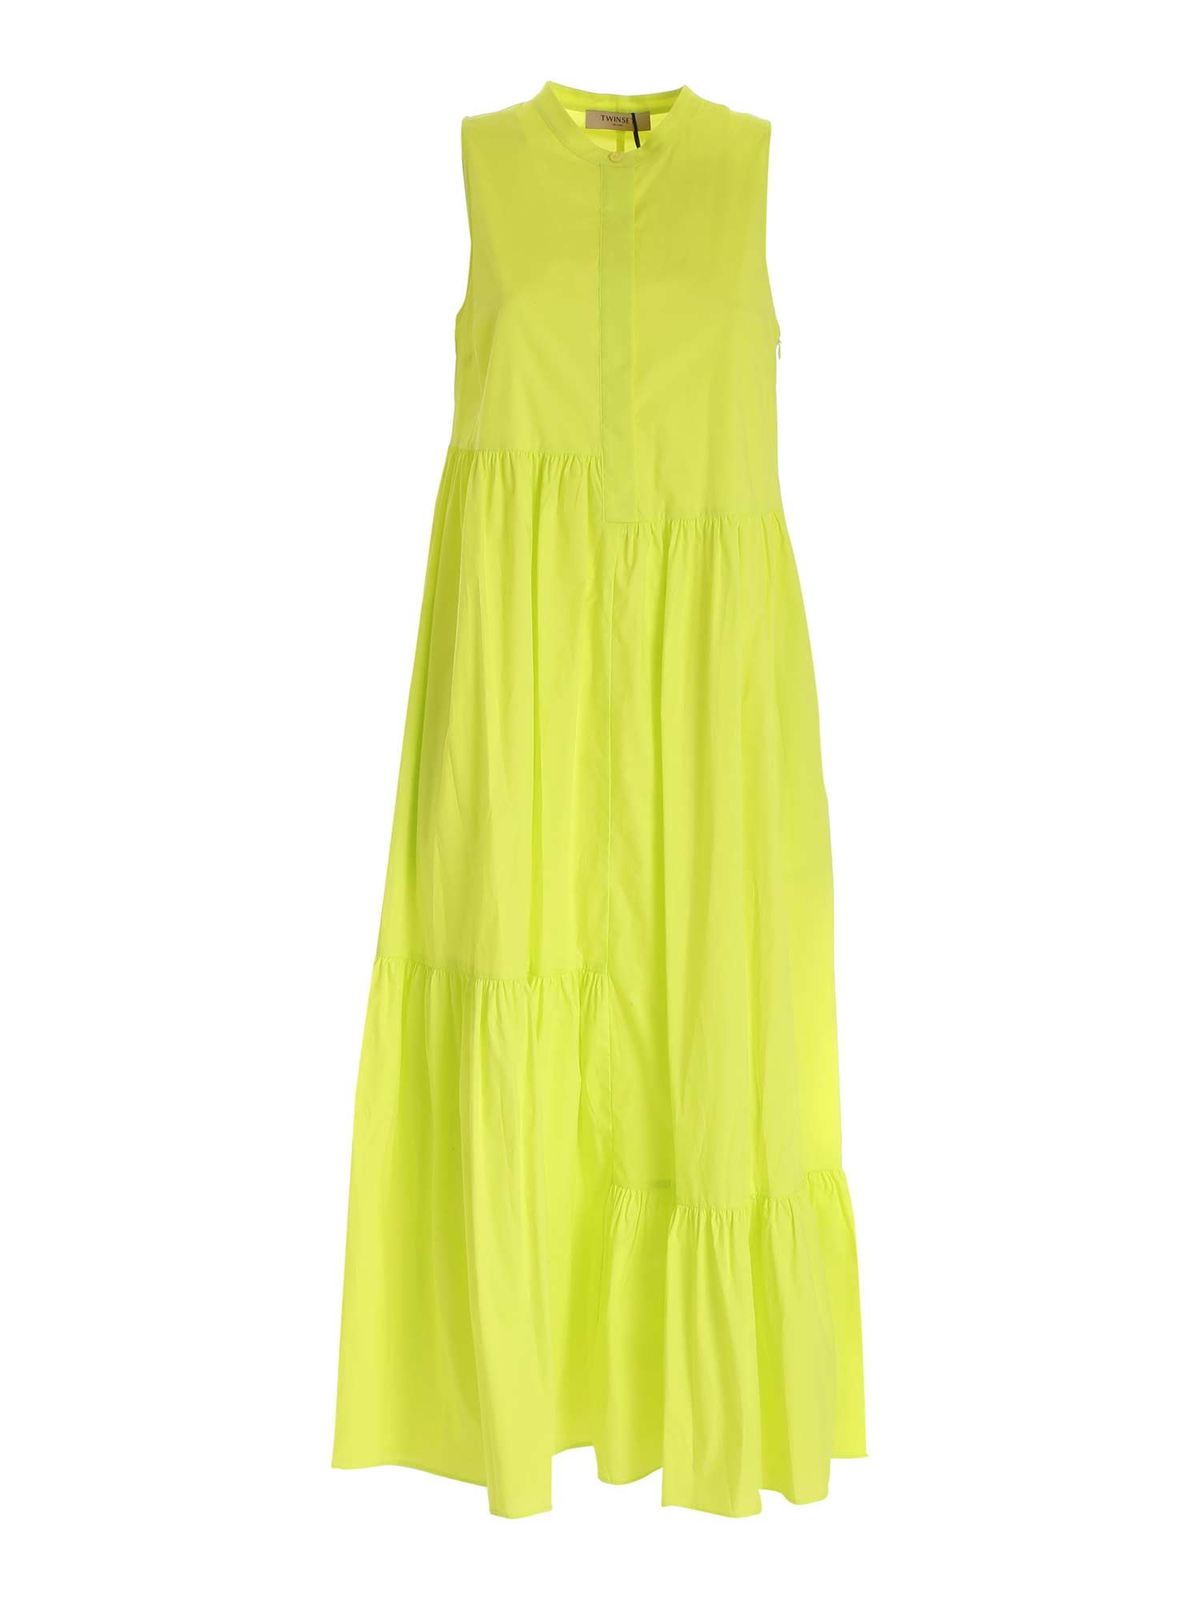 TWINSET CREWNECK DRESS IN LIME GREEN